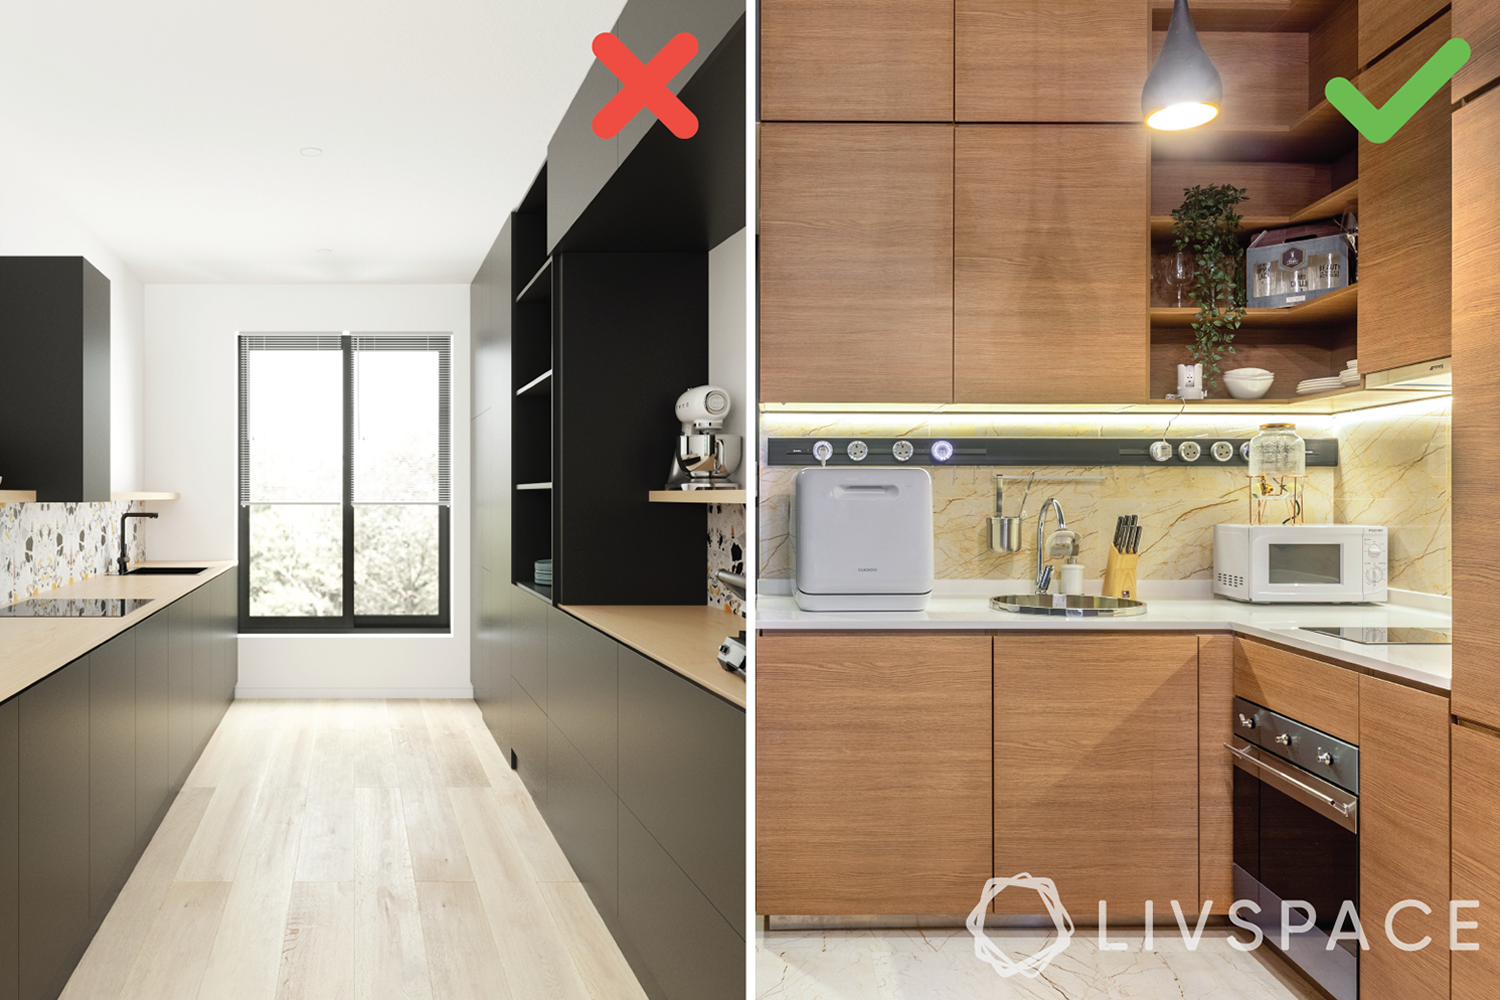 14 kitchen modular design mistakes to avoid — or how to live with them